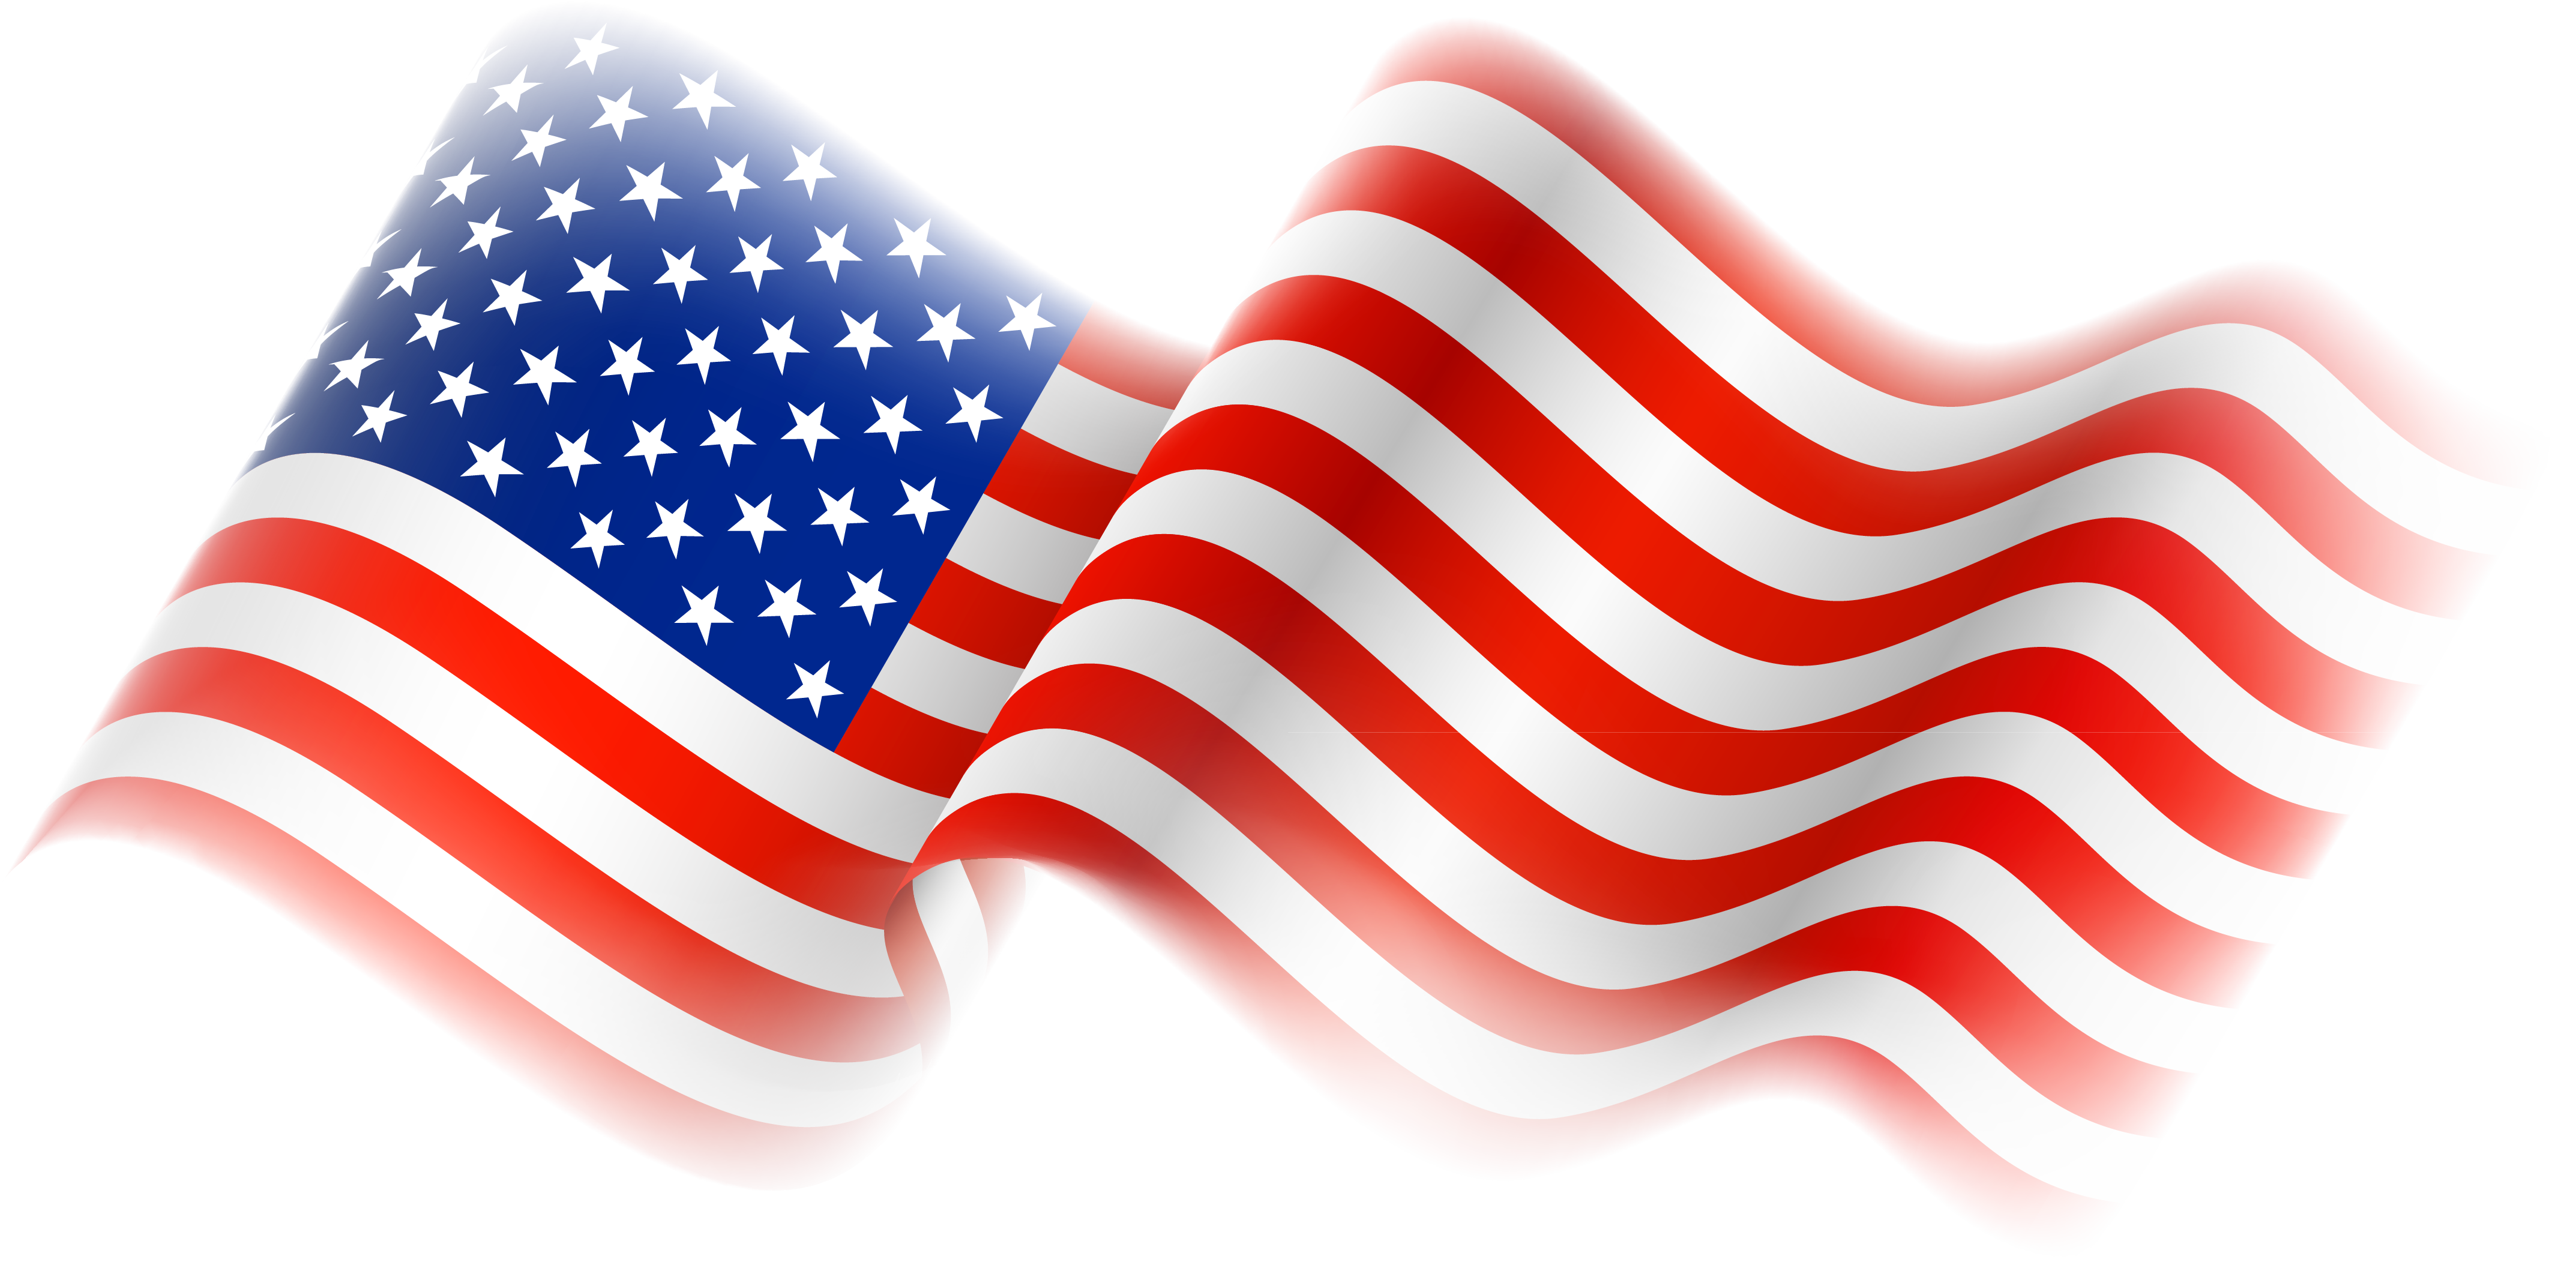 American flag united states flag clipart 4 clipartcow